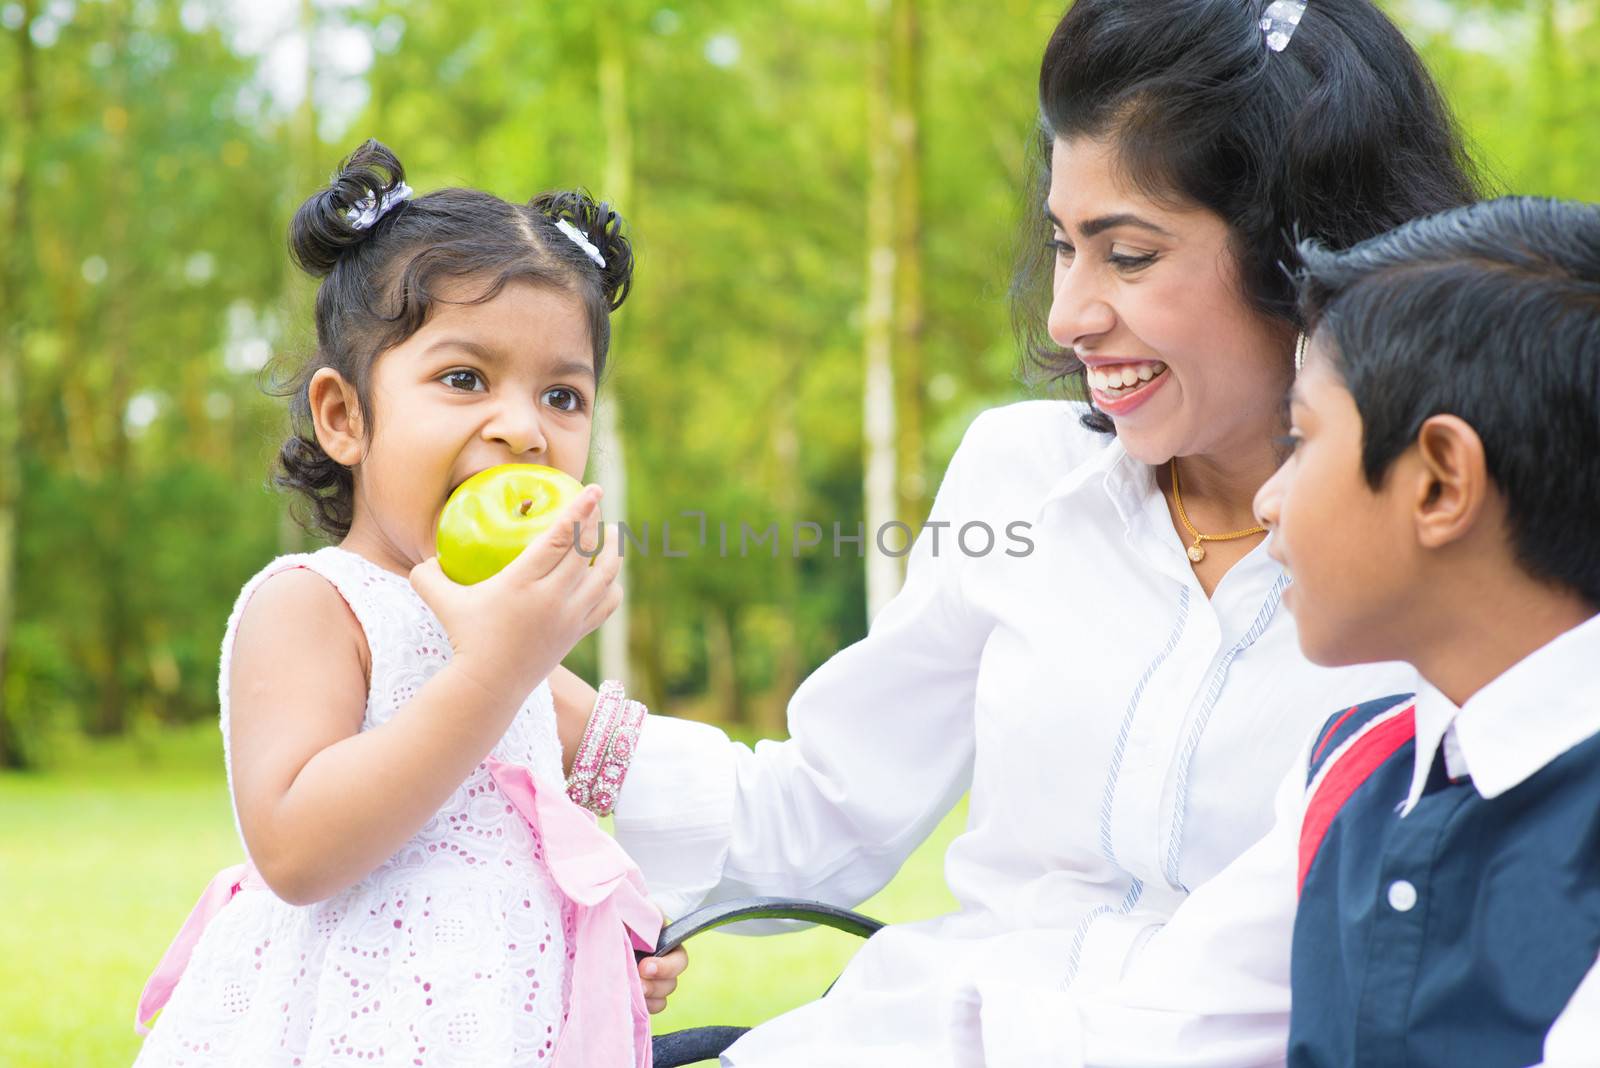 Happy Indian family. Asian girl eating an green apple at outdoor with mother and sibling.